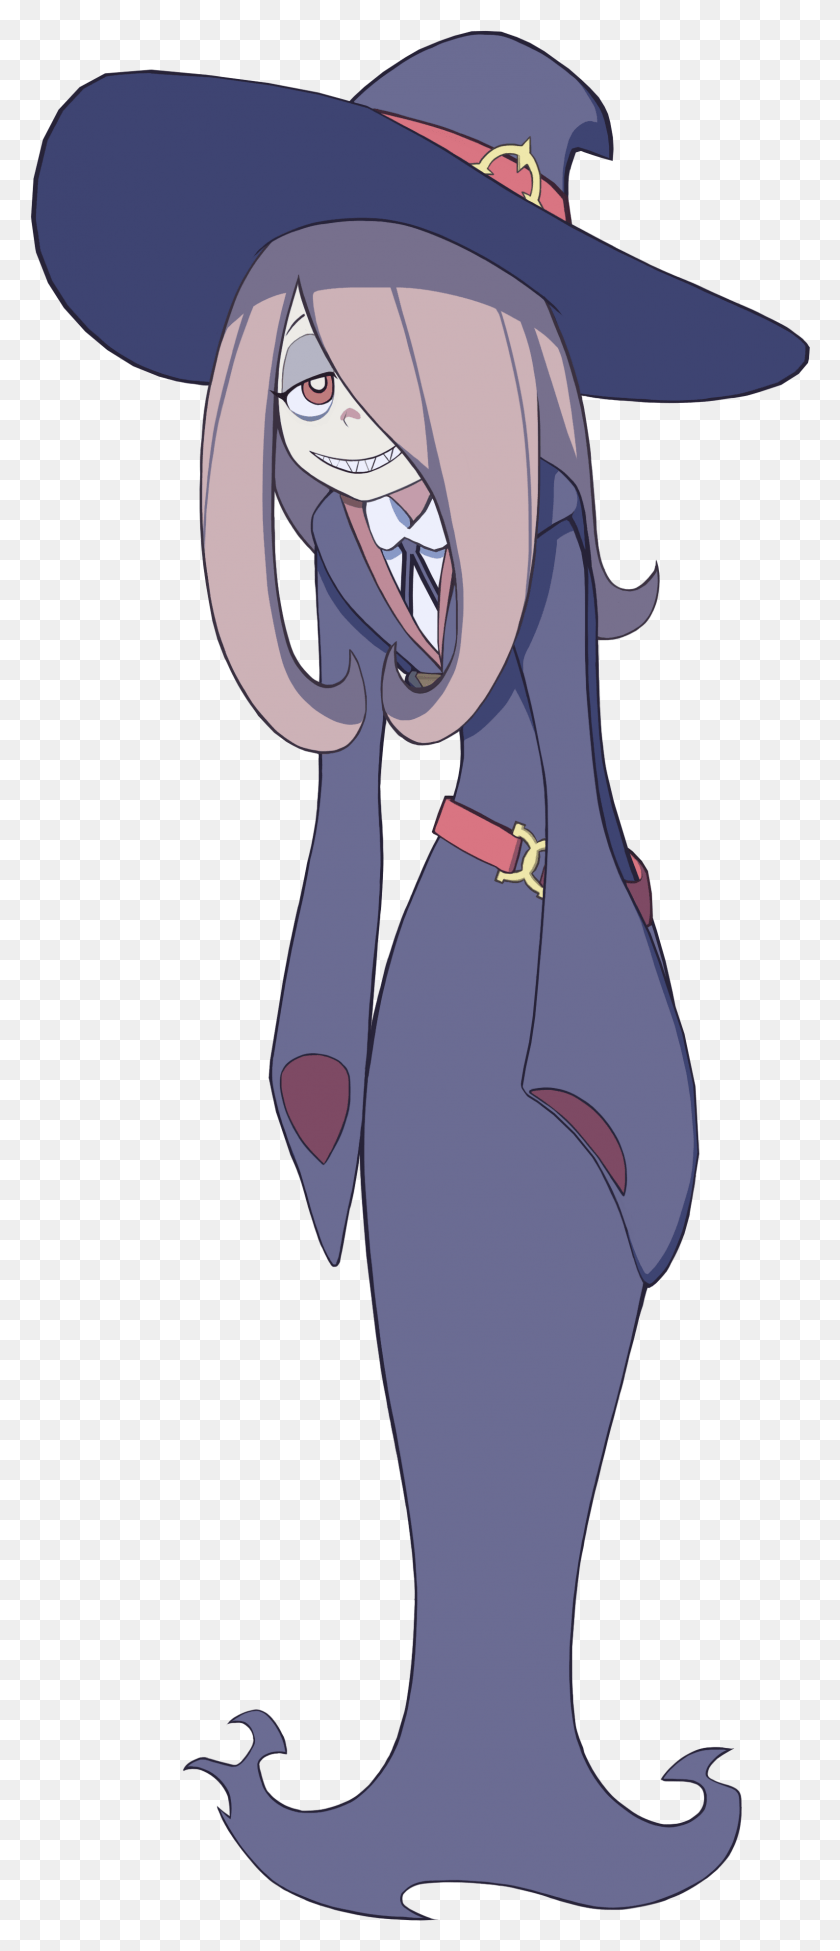 1591x3859 Descargar Png / Little Witch Academia Sucy My Little Witch Academia, Manga Larga, Ropa Hd Png